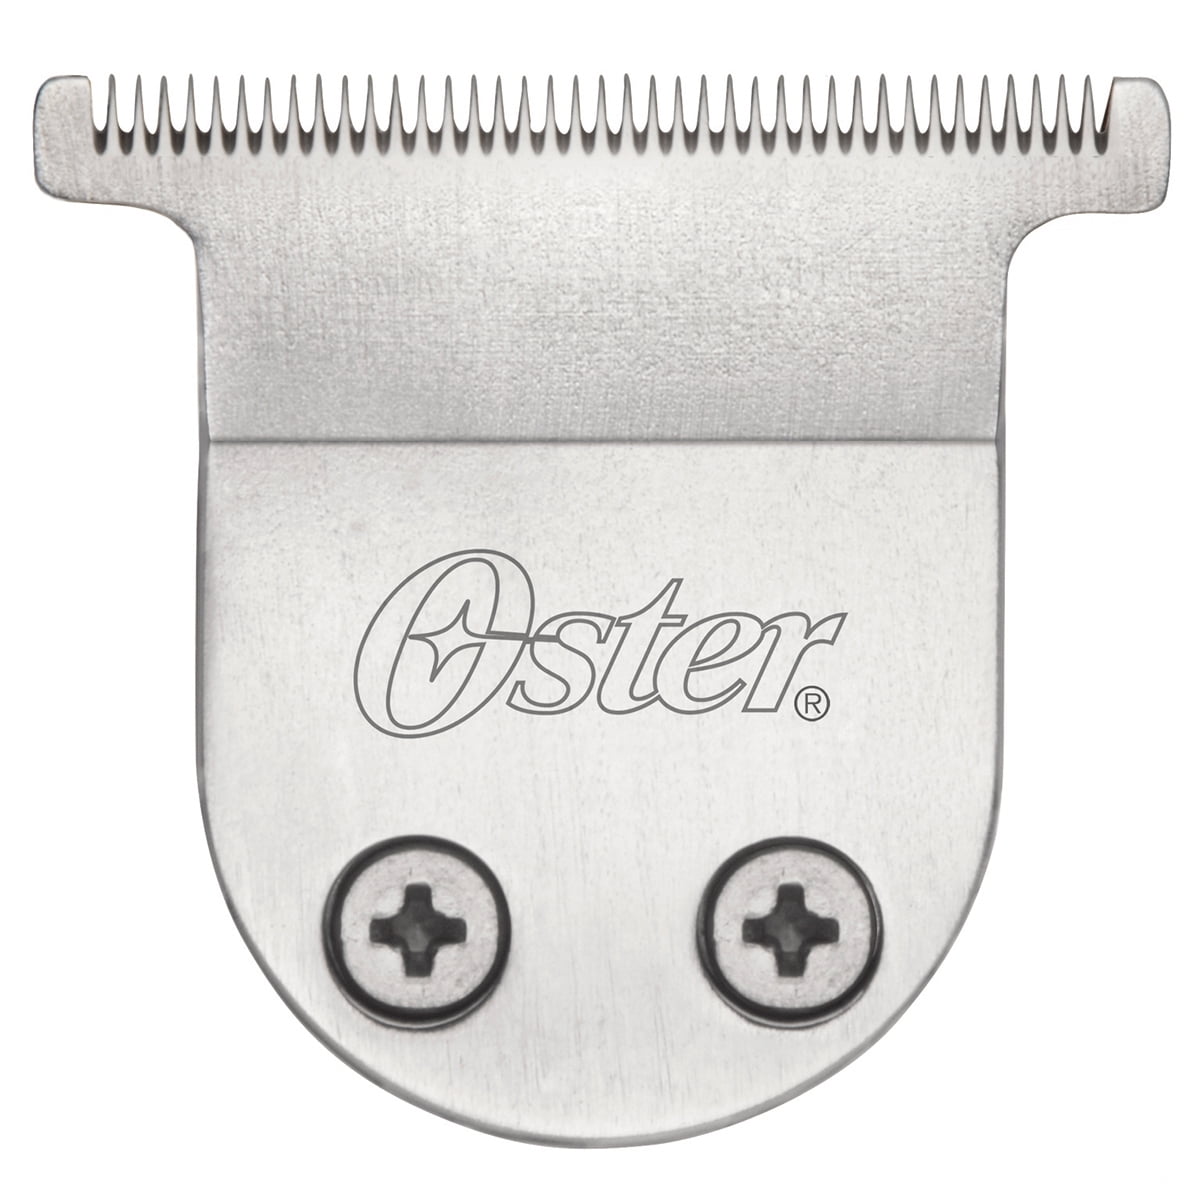 Oster TT-Trimmer Replacement Fits TeQie and Vorteq Trimmers, 76913-706 -